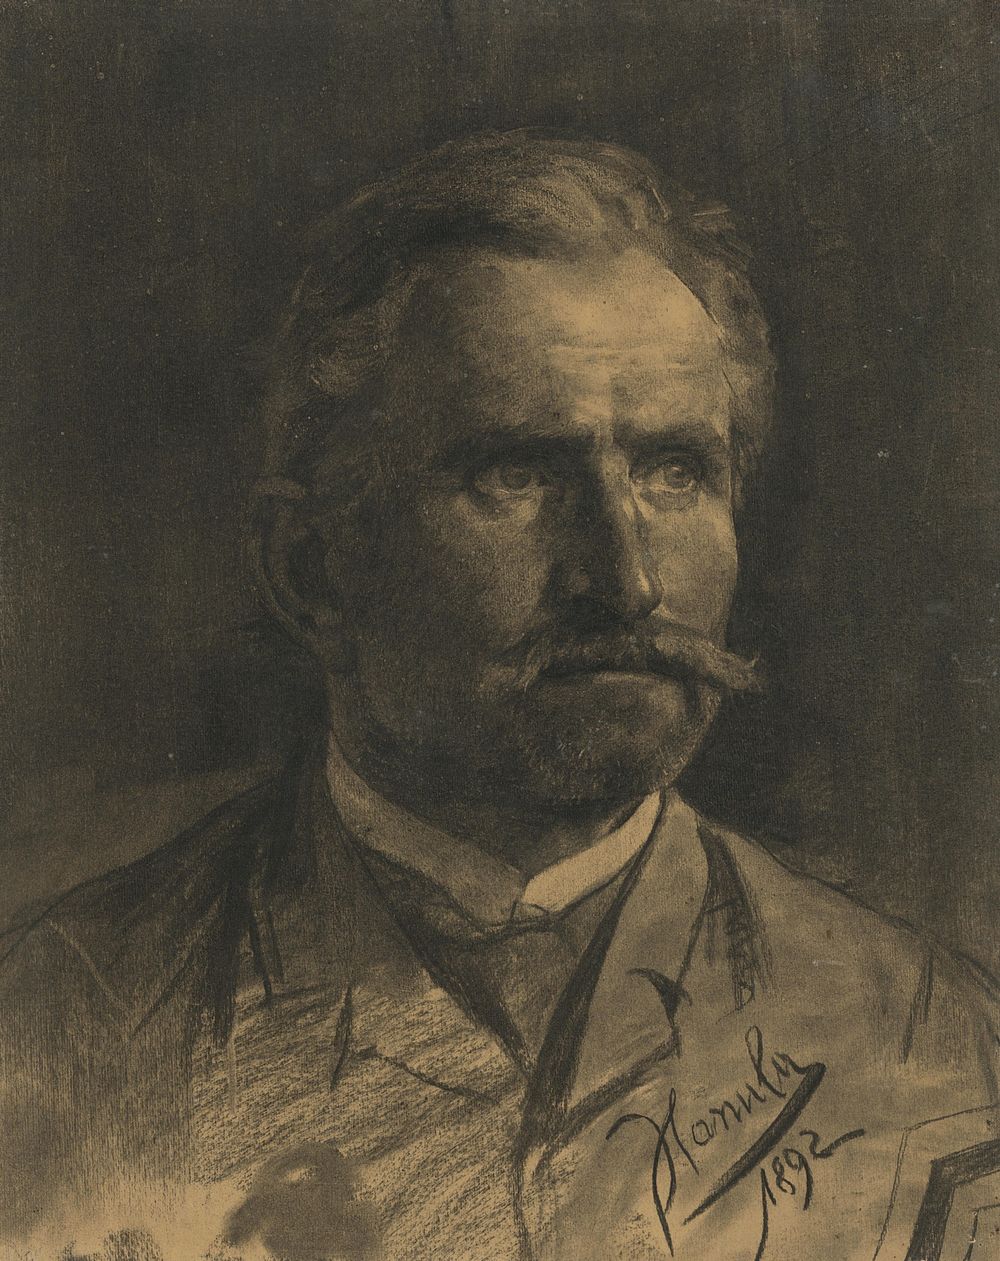 Head study of a man with beard and moustache